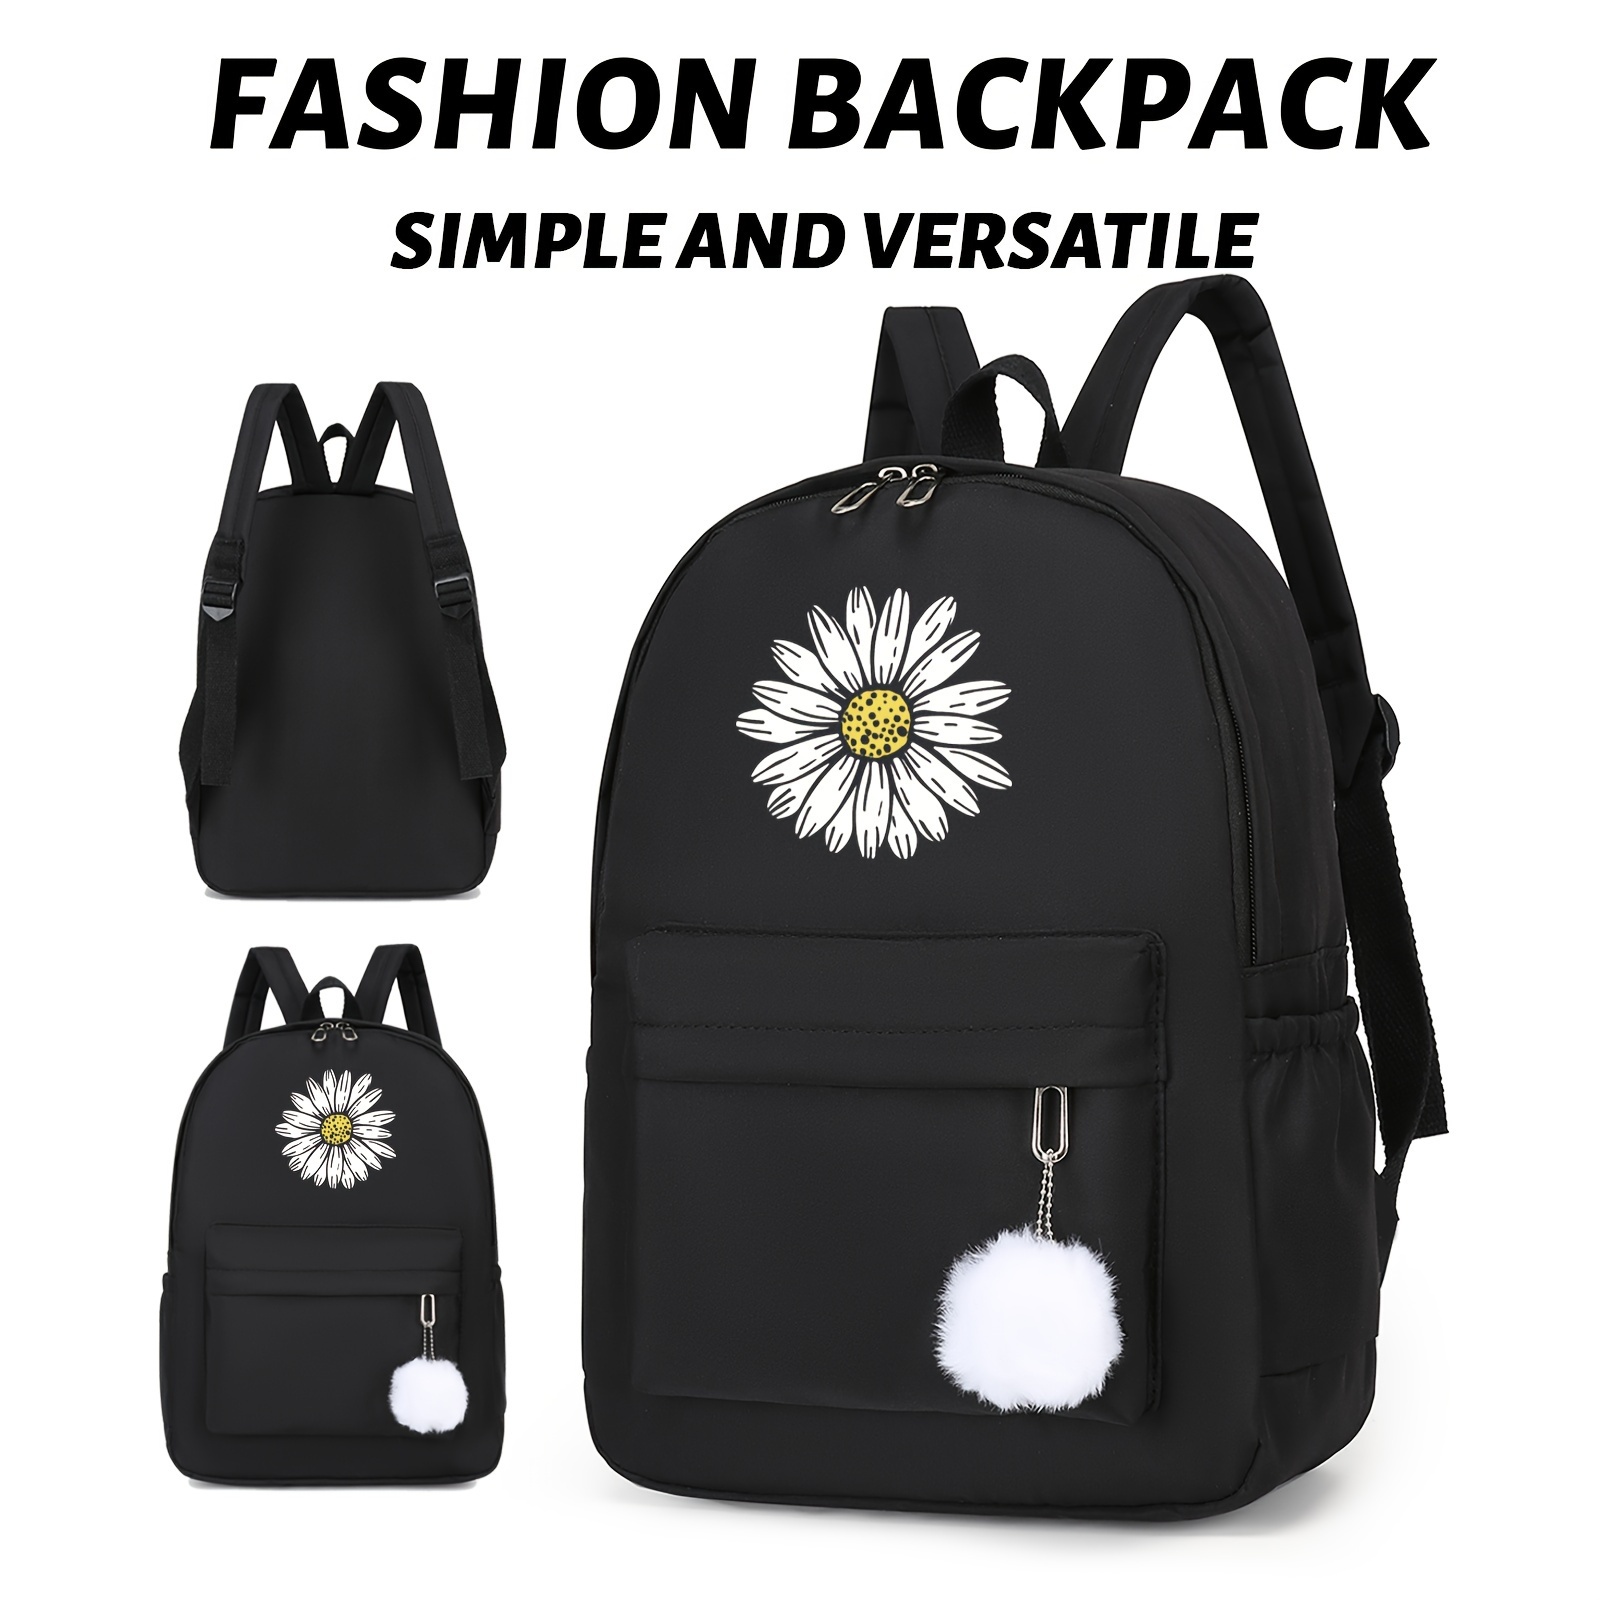 

Elegant White Flower Print Stylish And Versatile Black Backpack, Perfect For Travel With Its Large Capacity, Multi Functional Backpack, Suitable For Women And Men, Can Be Used For Various Purposes